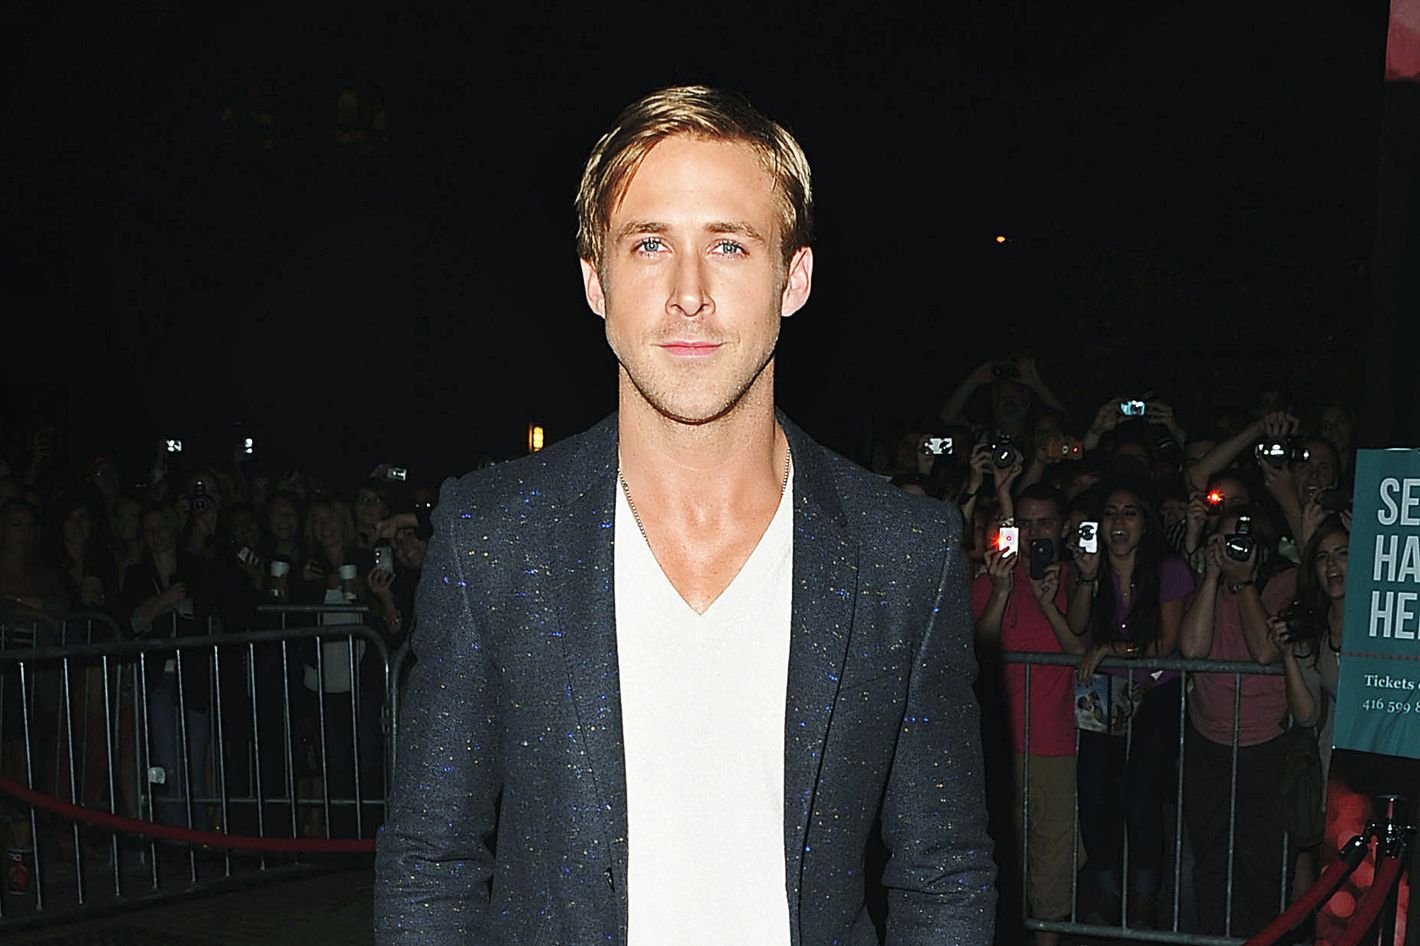 Do you know that Albert designed the suits that Ryan Gosling wore